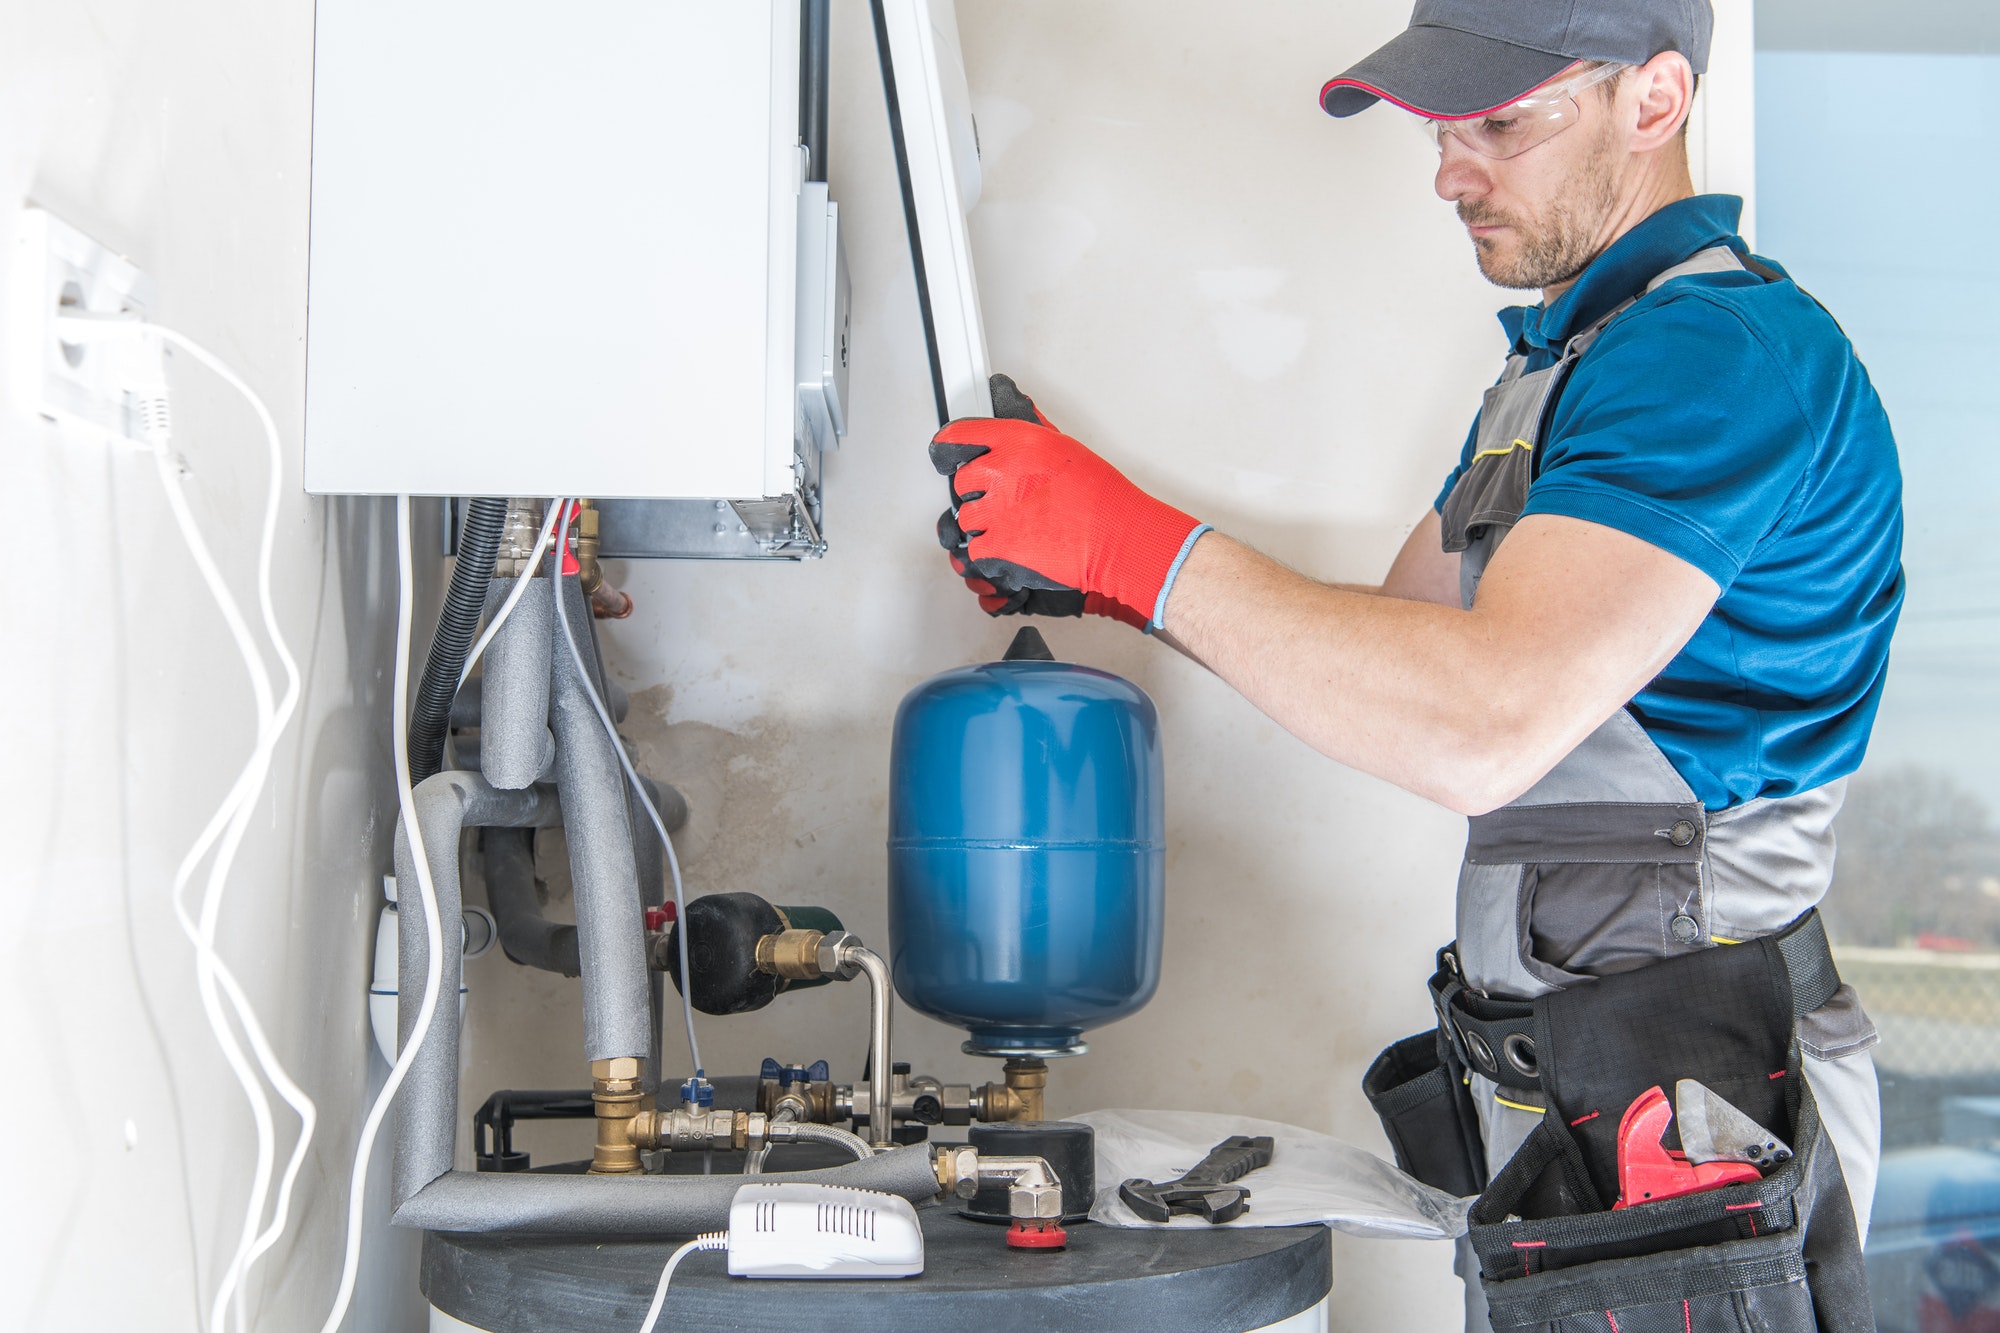 Brooklyn Queens HVAC has all of the fast, reliable, and affordable HVAC services that Queens and Brooklyn residents need to keep their homes comfortable. Call (718) 649-9000 or Get A Free Estimate to schedule service!